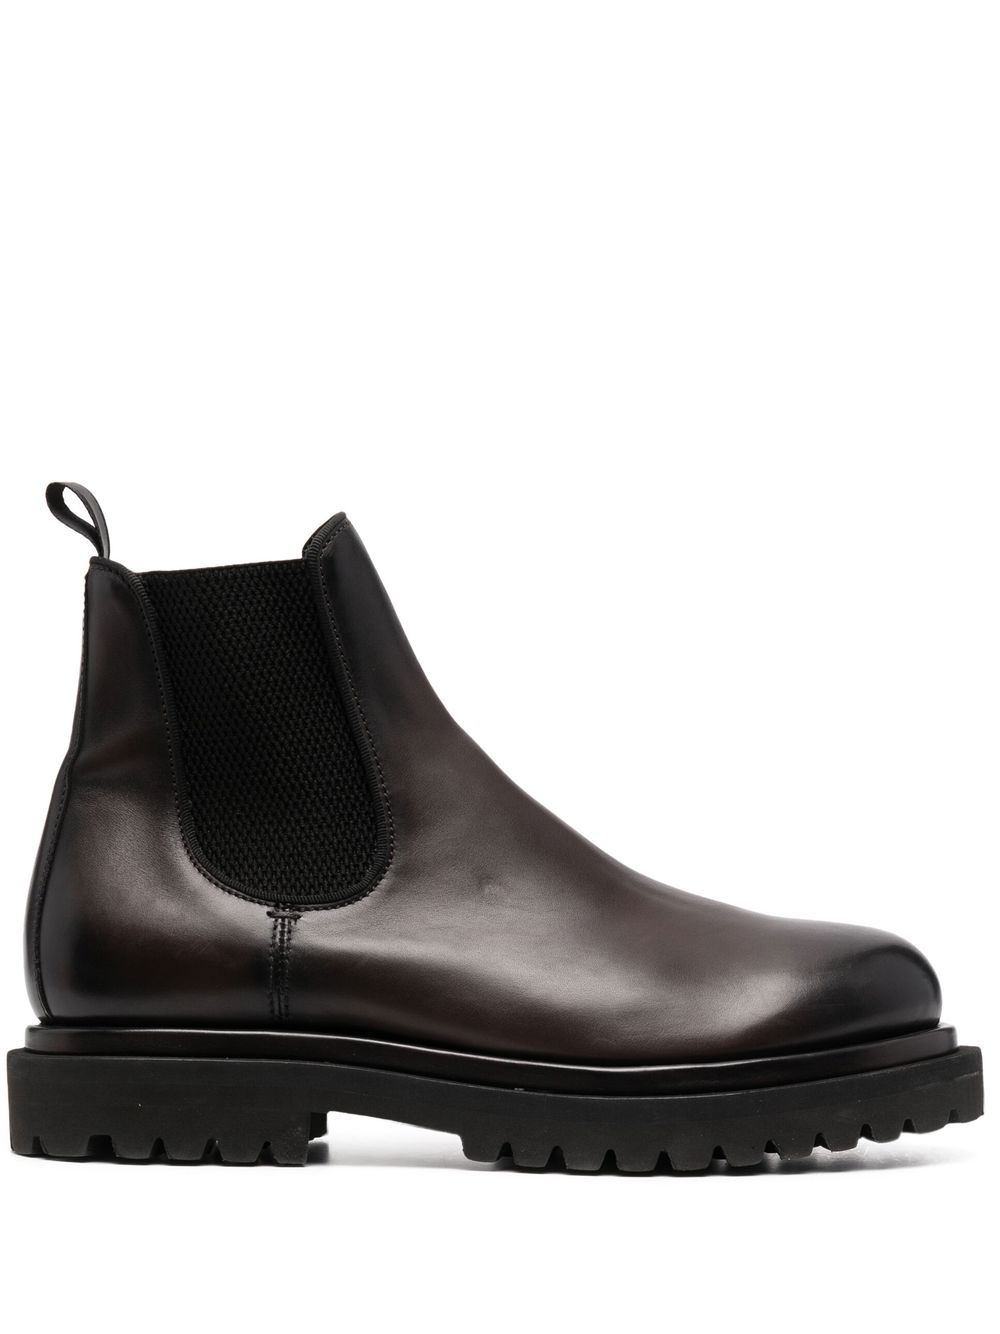 Image 1 of Officine Creative Eventual slip-on boots